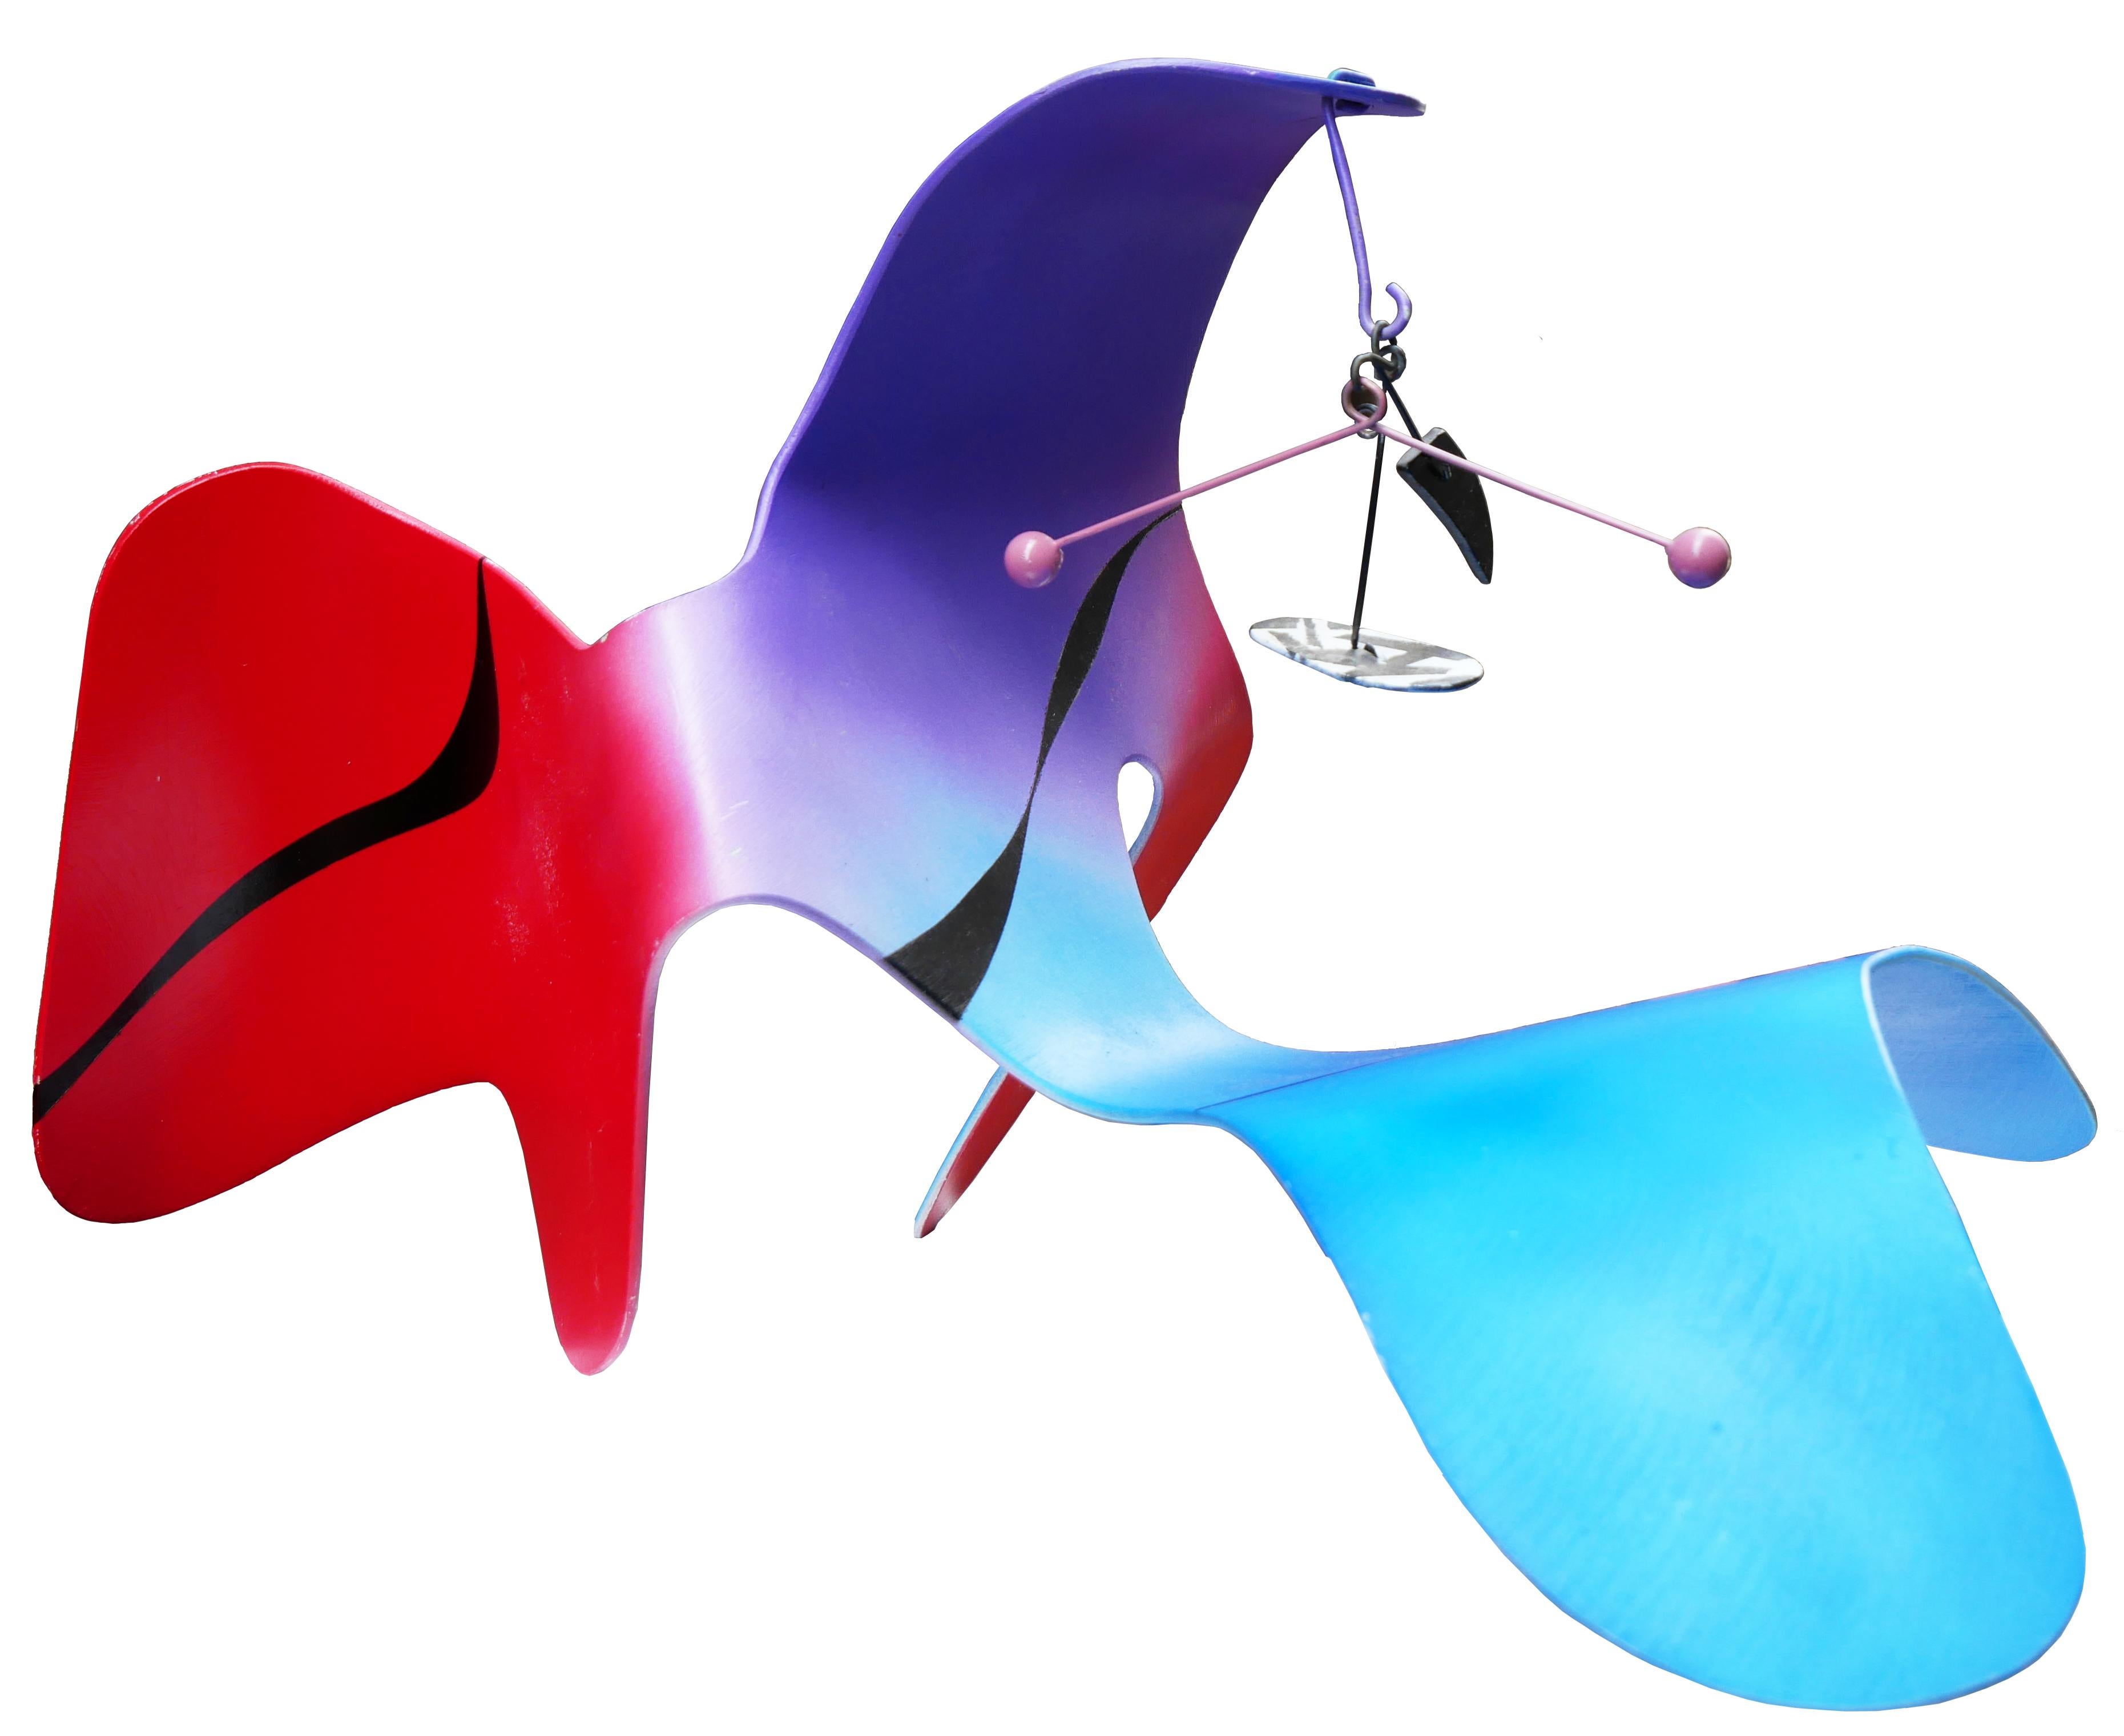 Red, Purple, and Blue Modernist Abstract Biomorphic Mobile Sculpture